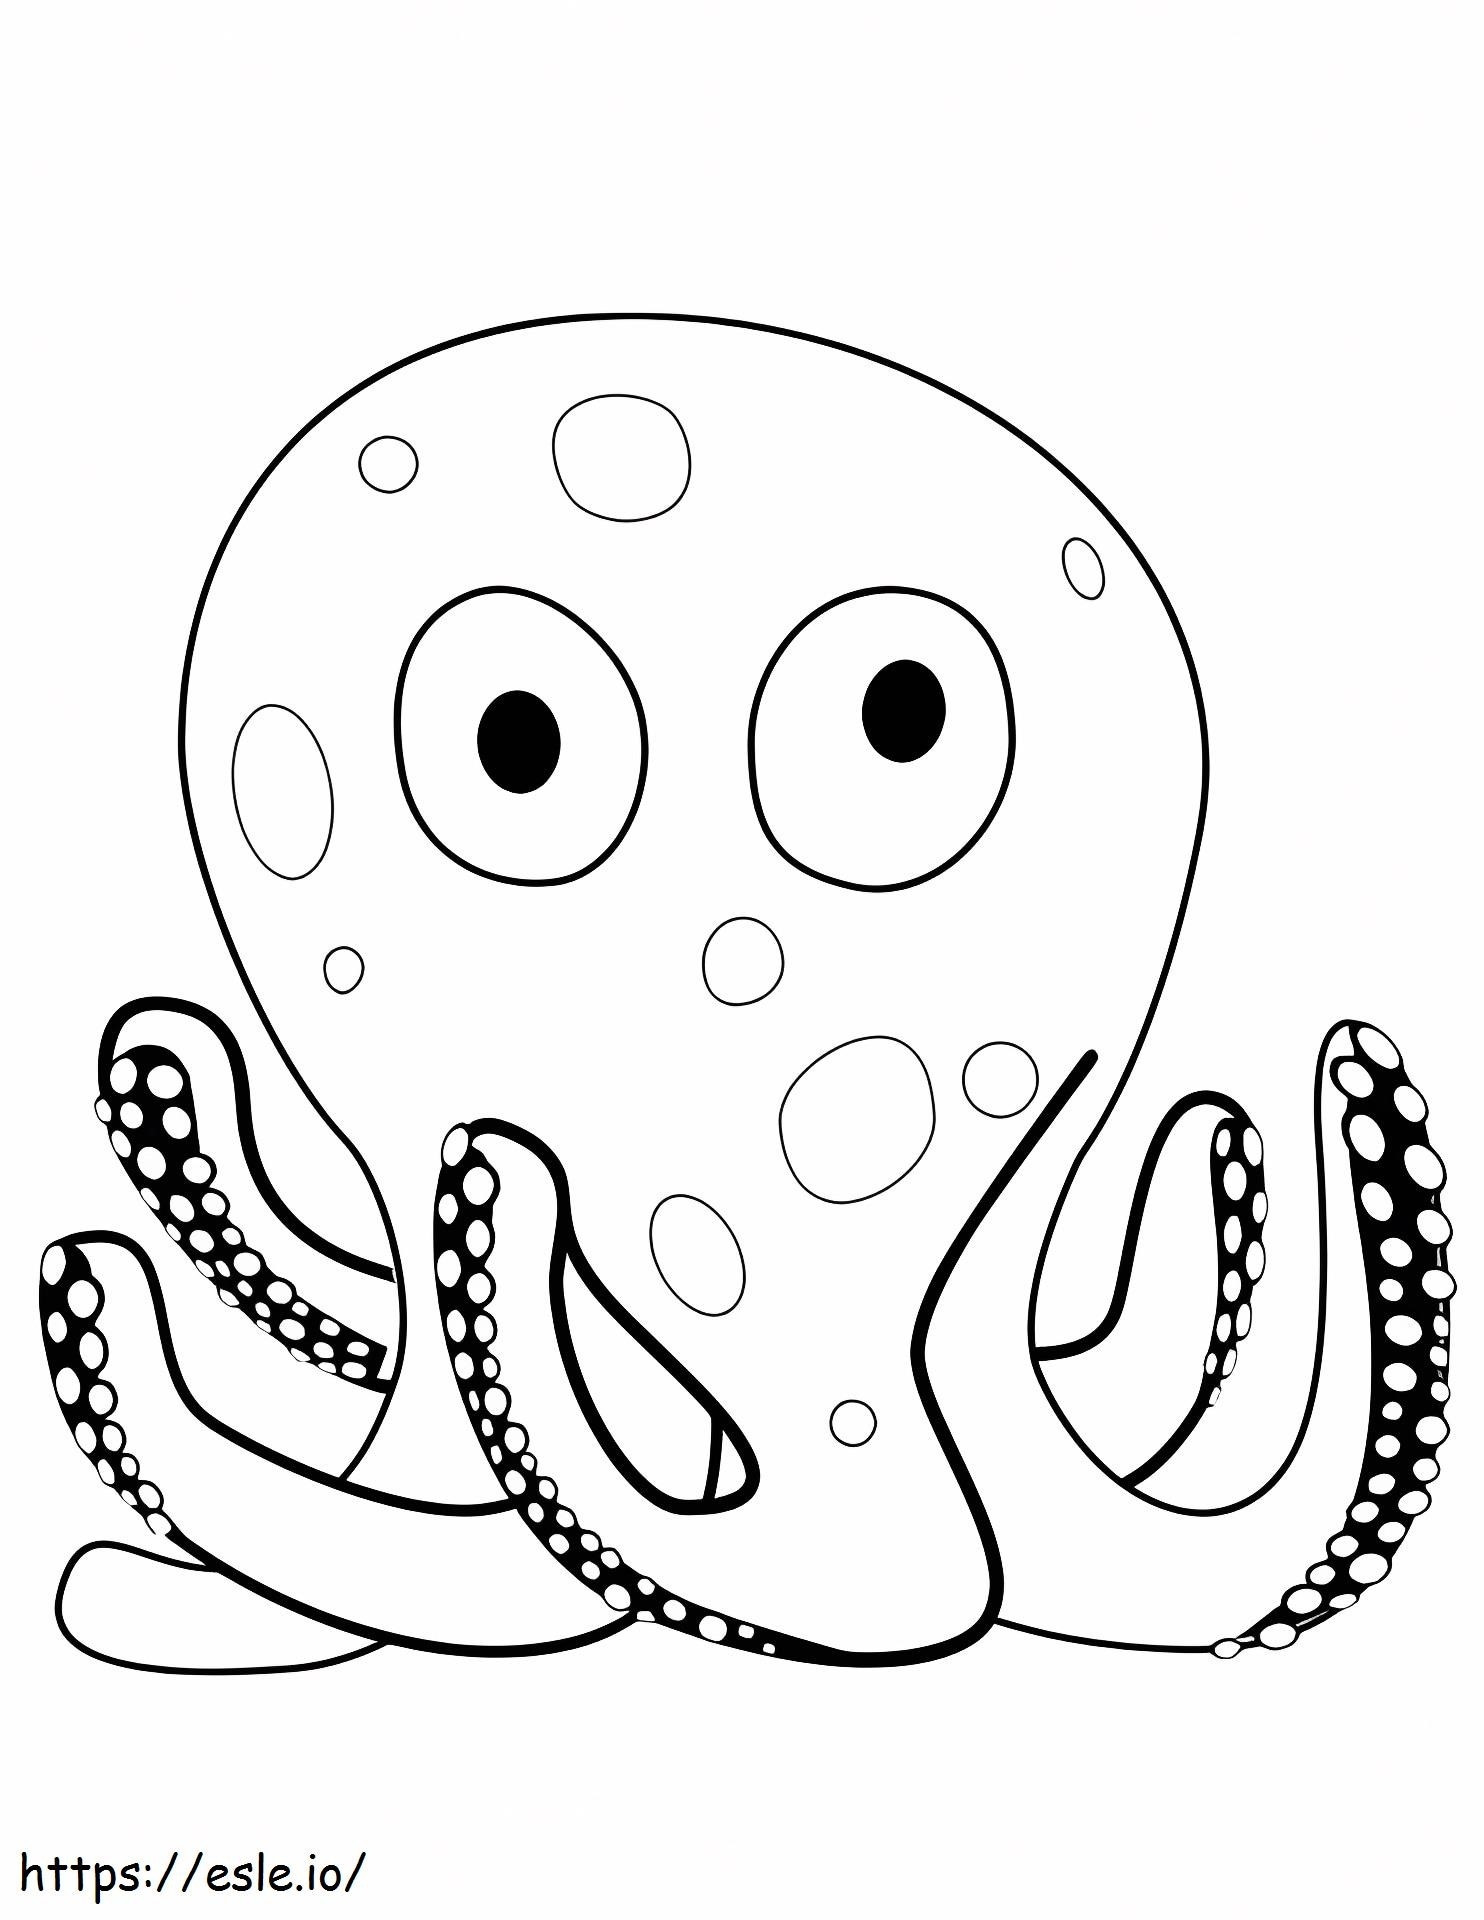 1559548077_Cute Octopus A4 coloring page